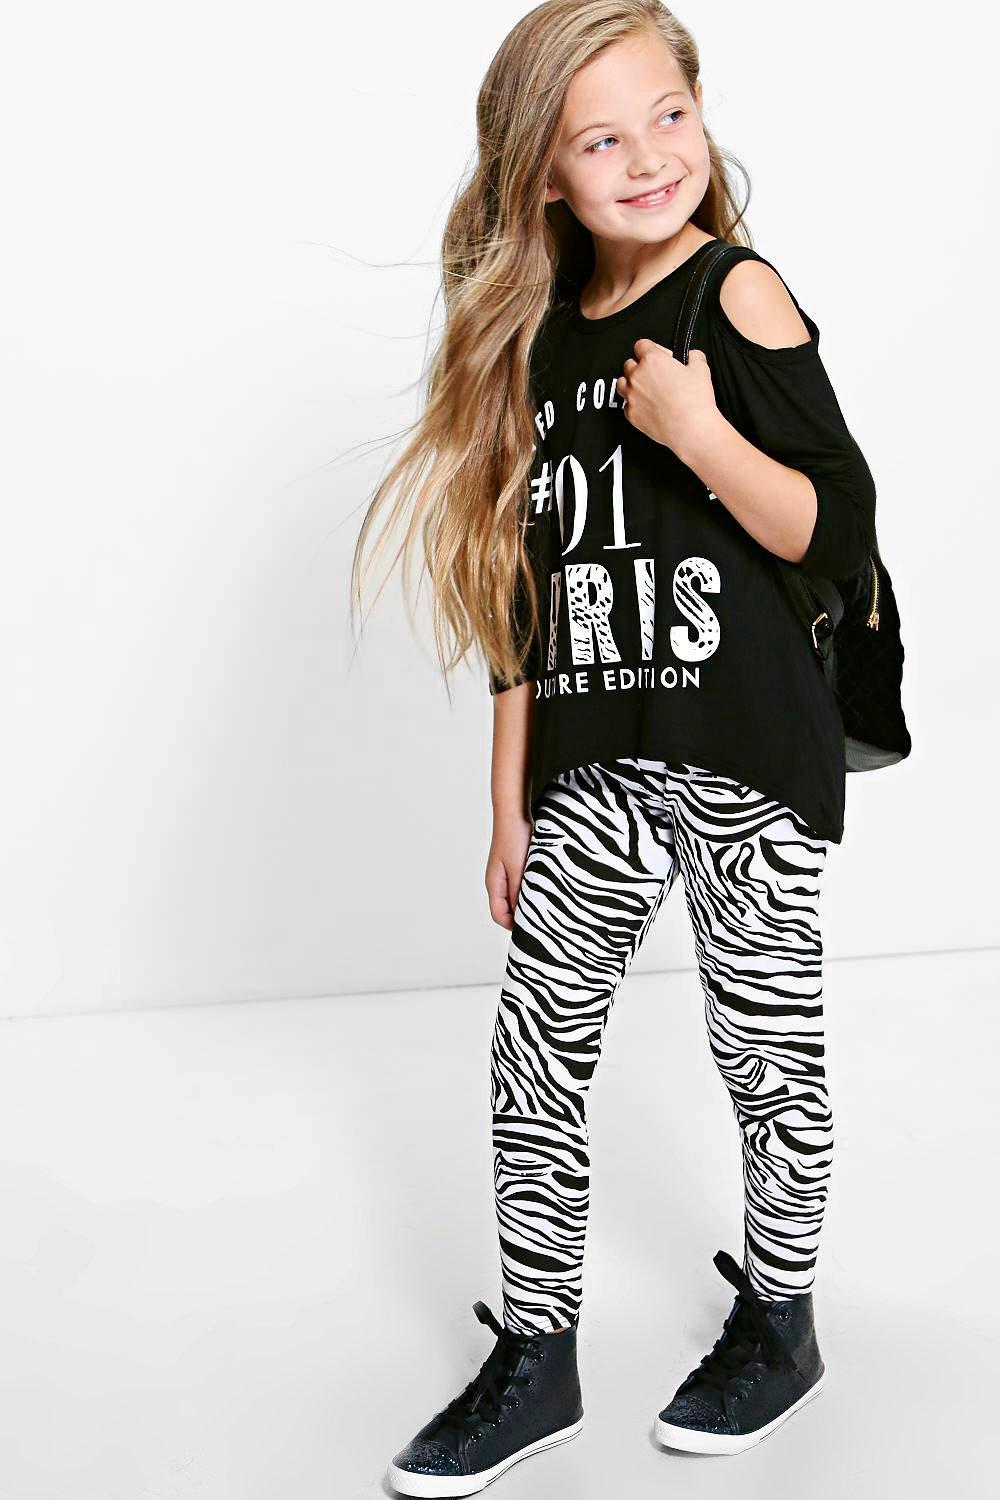 Boohoo Womens Girls Limited Collection Top And Leggings Set Ebay